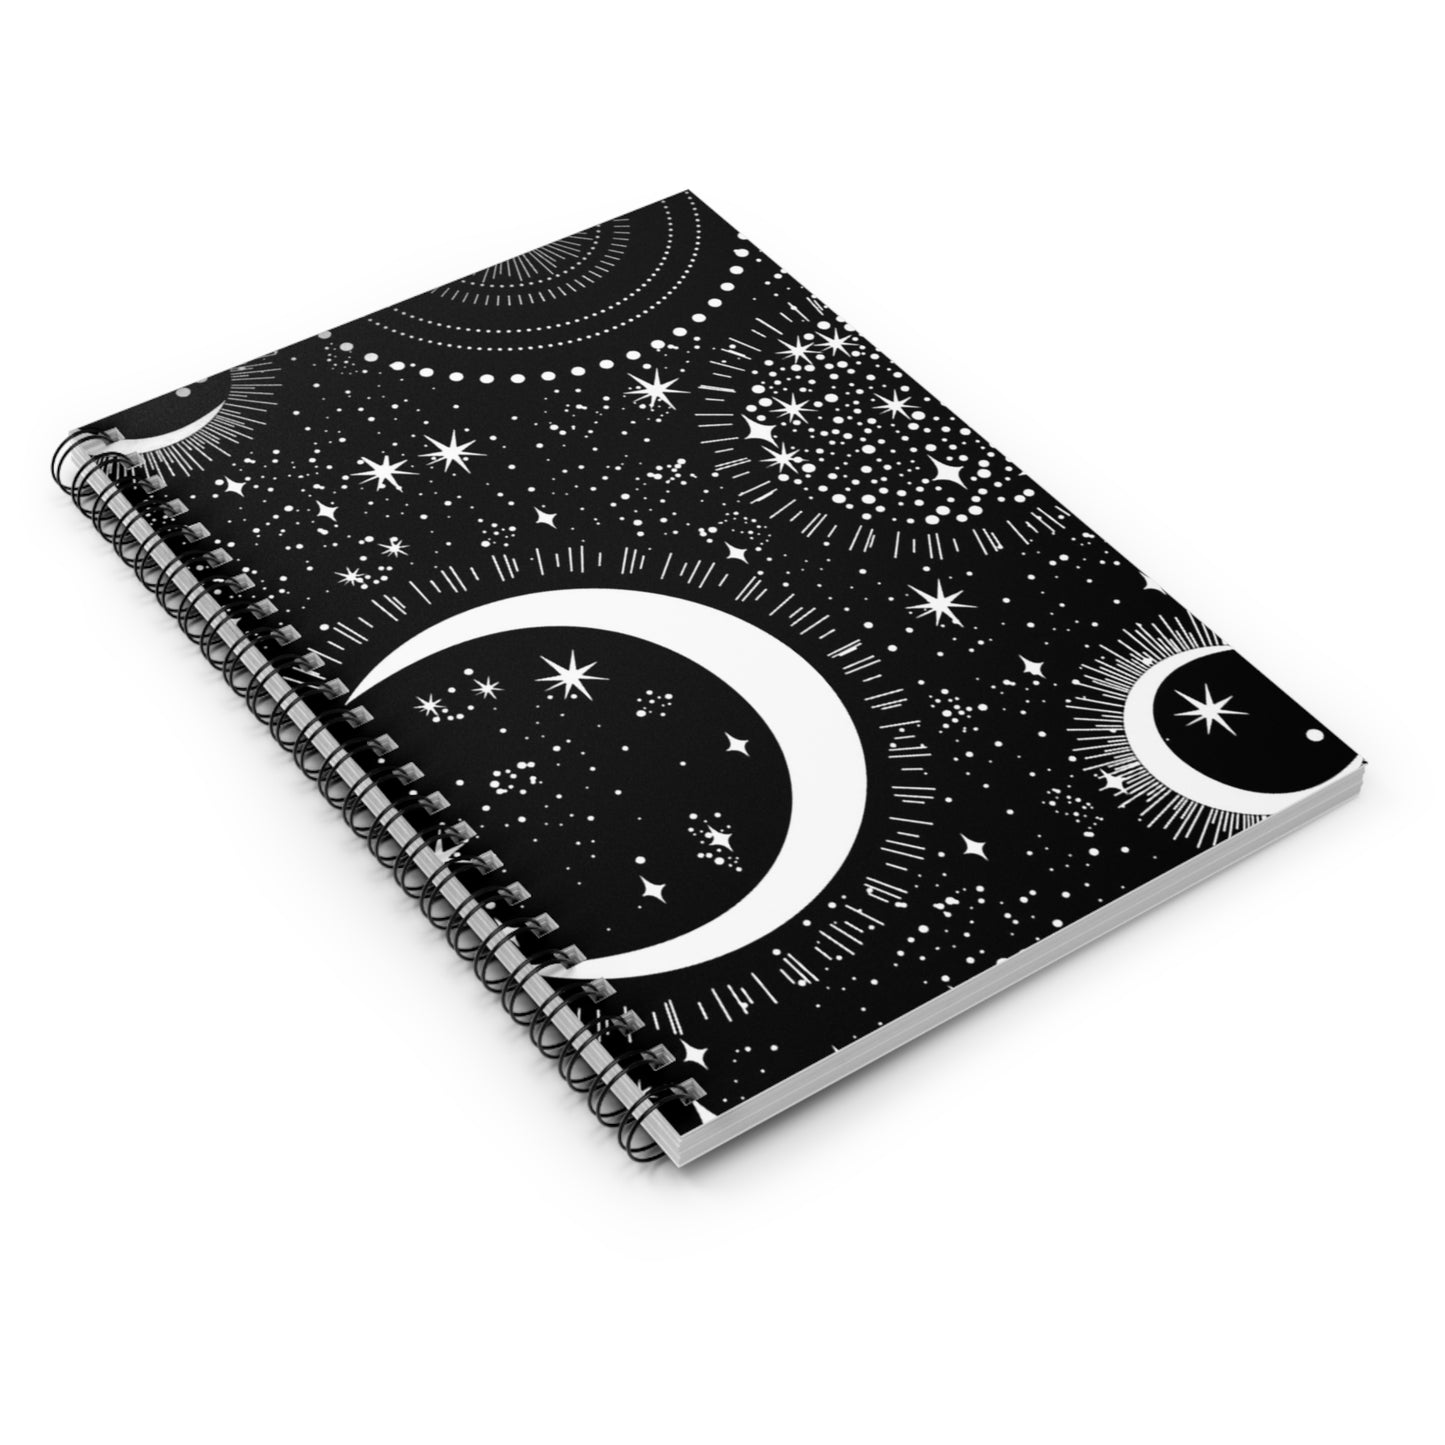 Moons and Stars Journal Spiral Notebook - Ruled Line